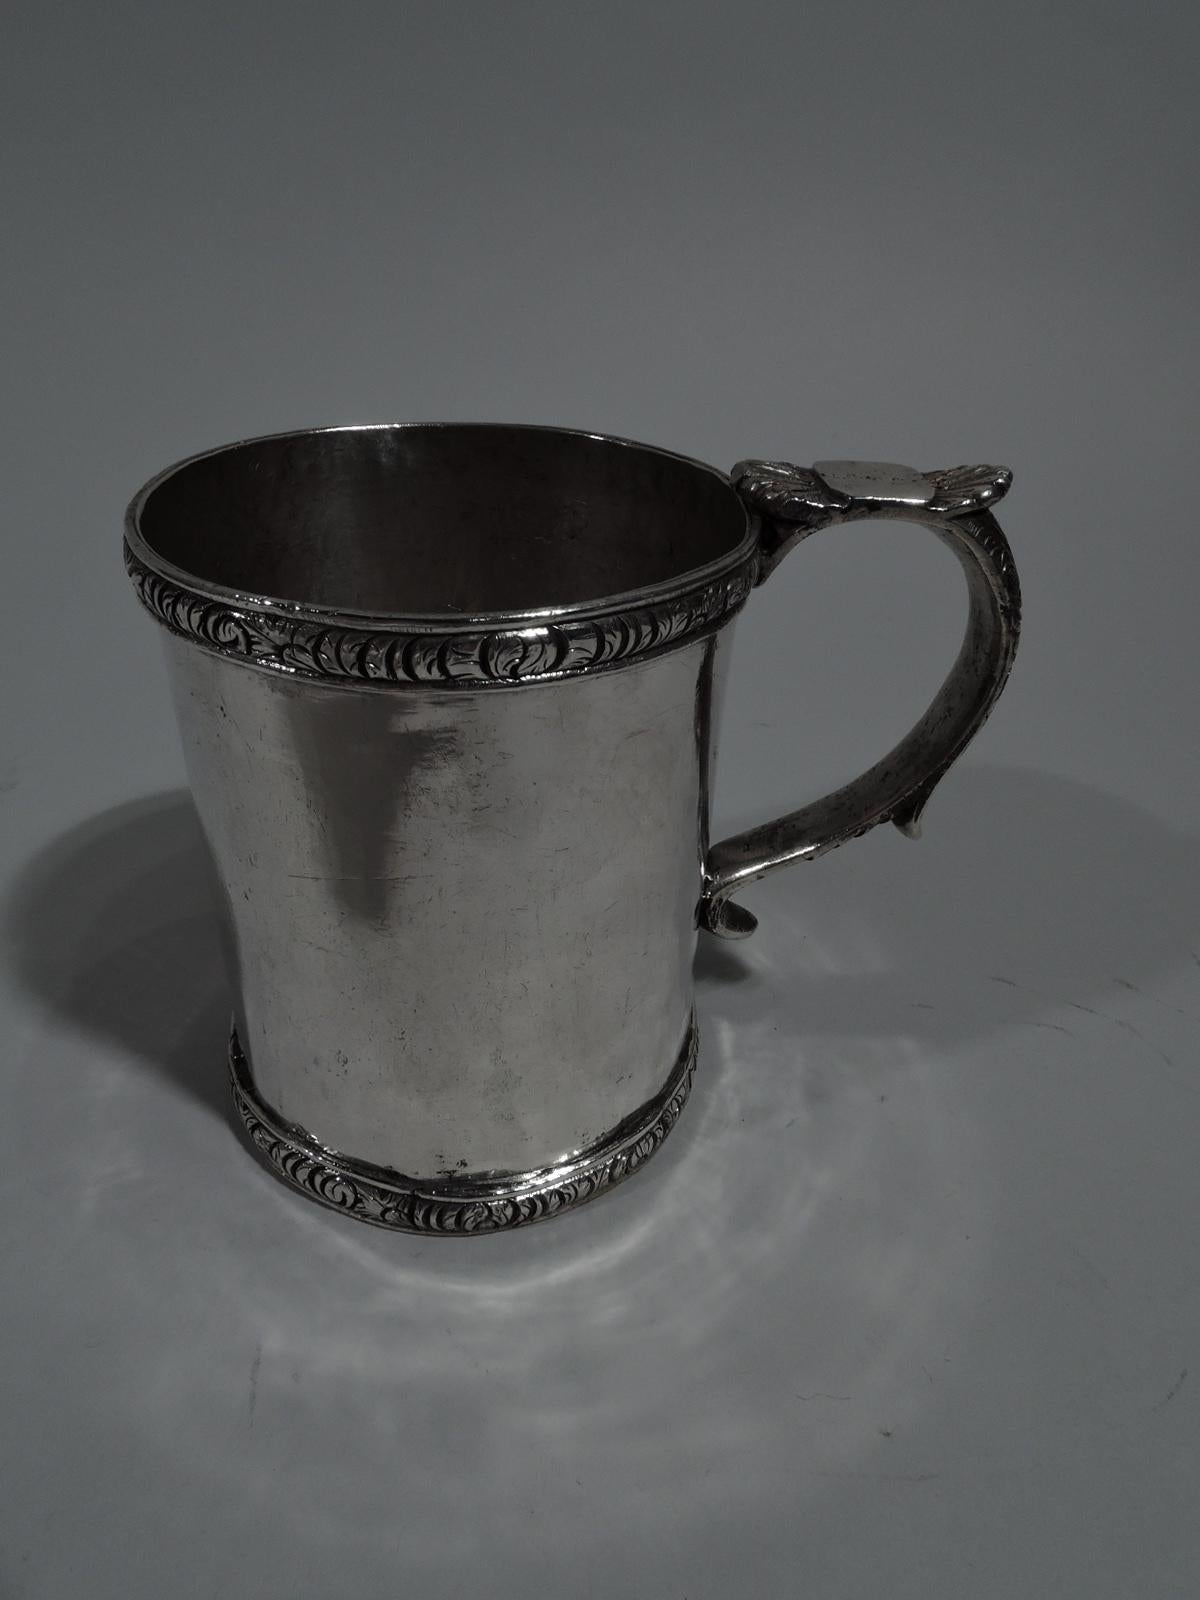 South American silver christening mug, circa 1850. Straight sides and ornamental rims with dense tooled leaves. S-scroll handle with stylized leaf-cap thumb rest and tooled flowers and scrolls. Heavy weight: 9.5 troy ounces.